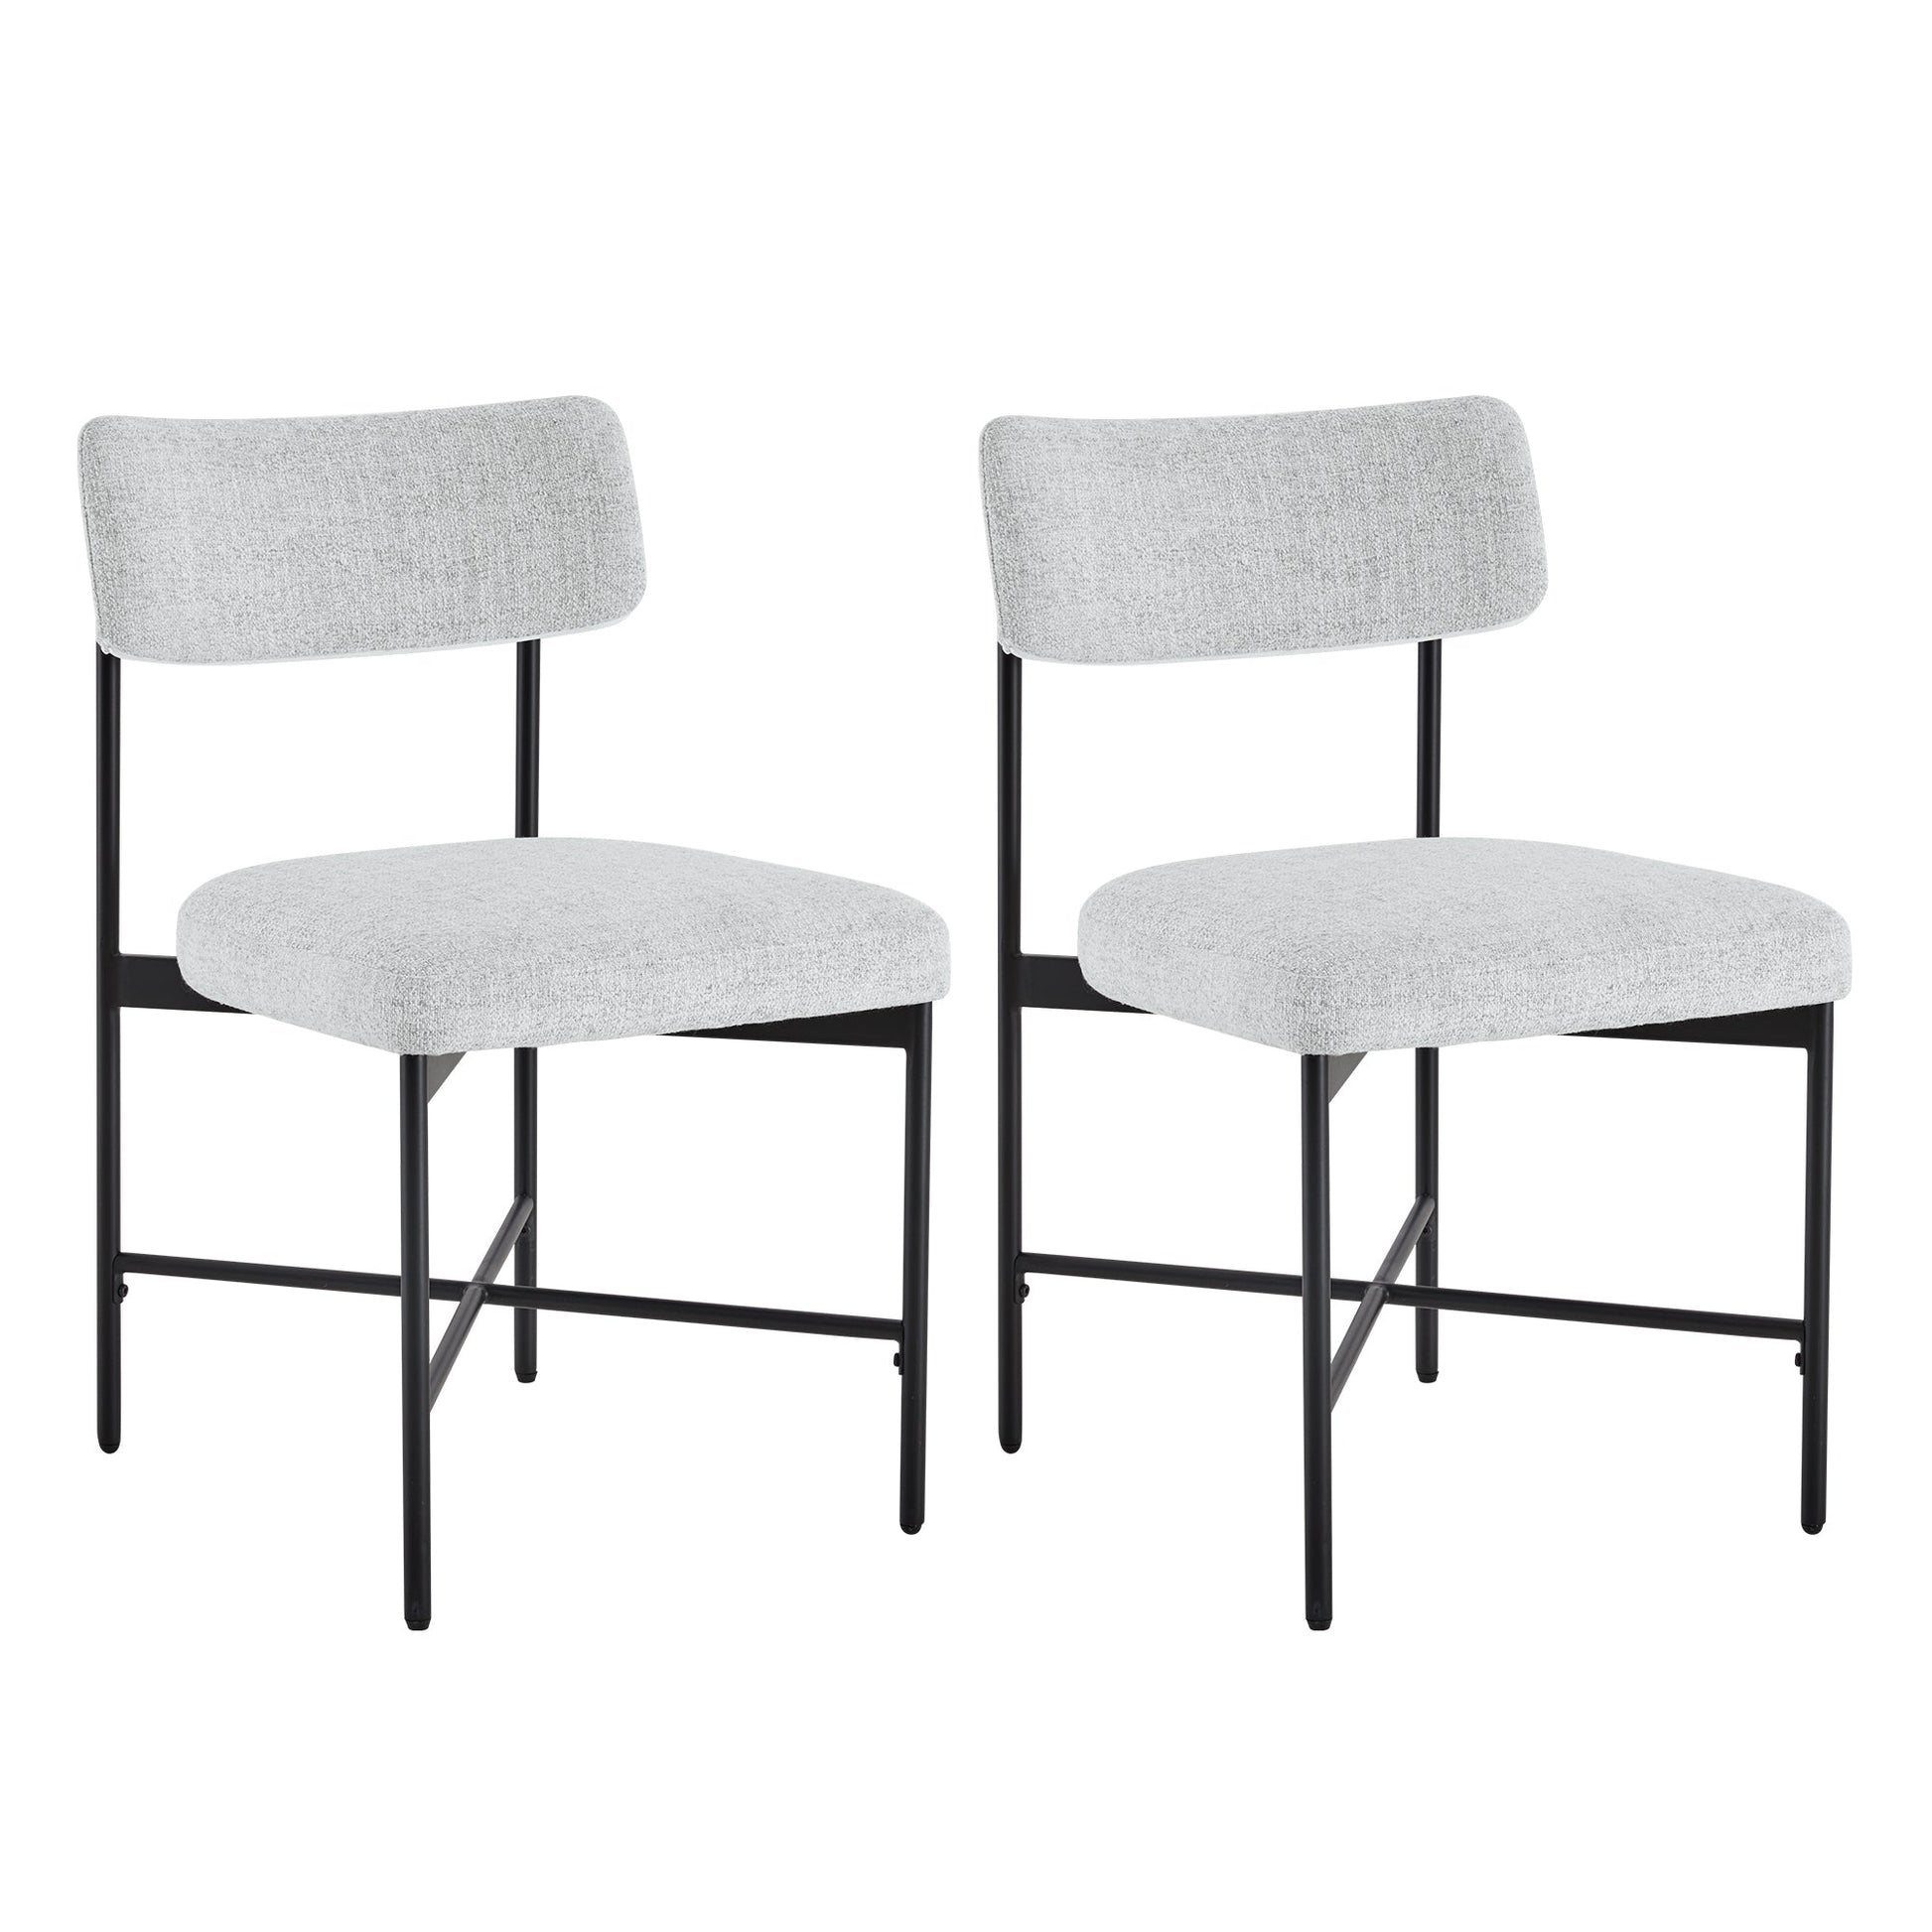 CHITA LIVING-Lovy Dining Chair (Set of 2)-Dining Chairs-Fabric-White (Multi-colored)-